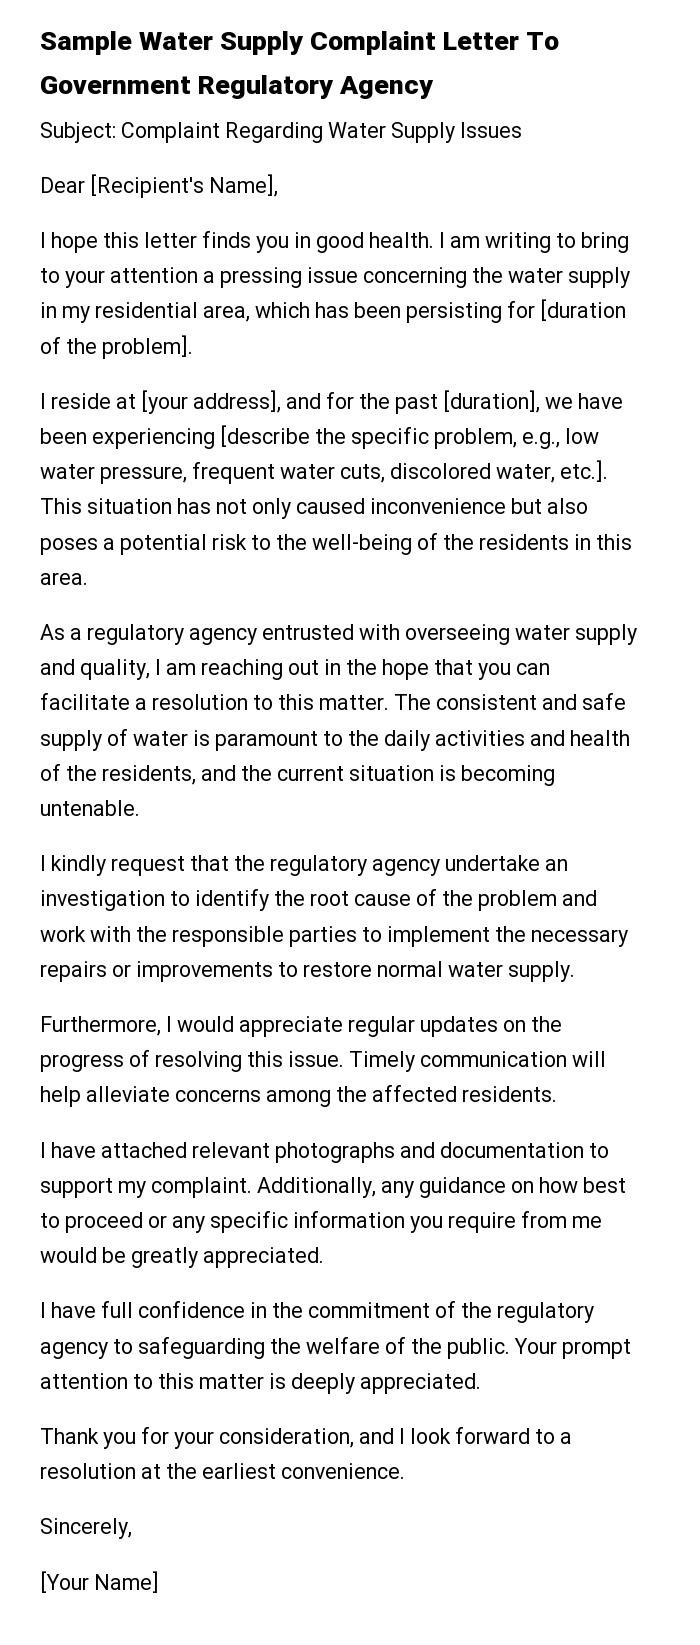 Sample Water Supply Complaint Letter To Government Regulatory Agency